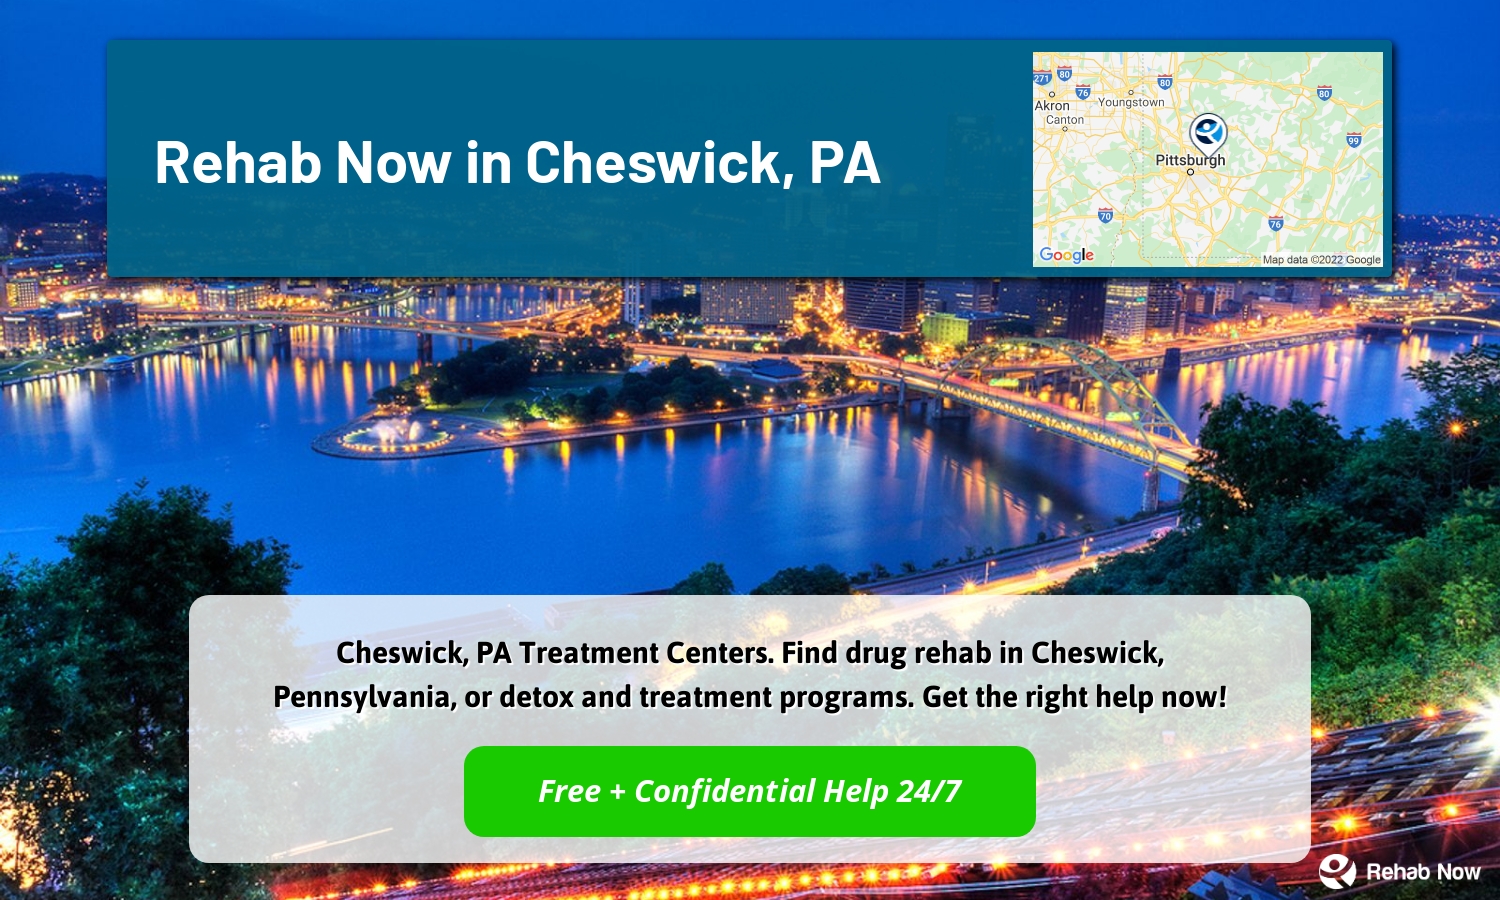 Cheswick, PA Treatment Centers. Find drug rehab in Cheswick, Pennsylvania, or detox and treatment programs. Get the right help now!